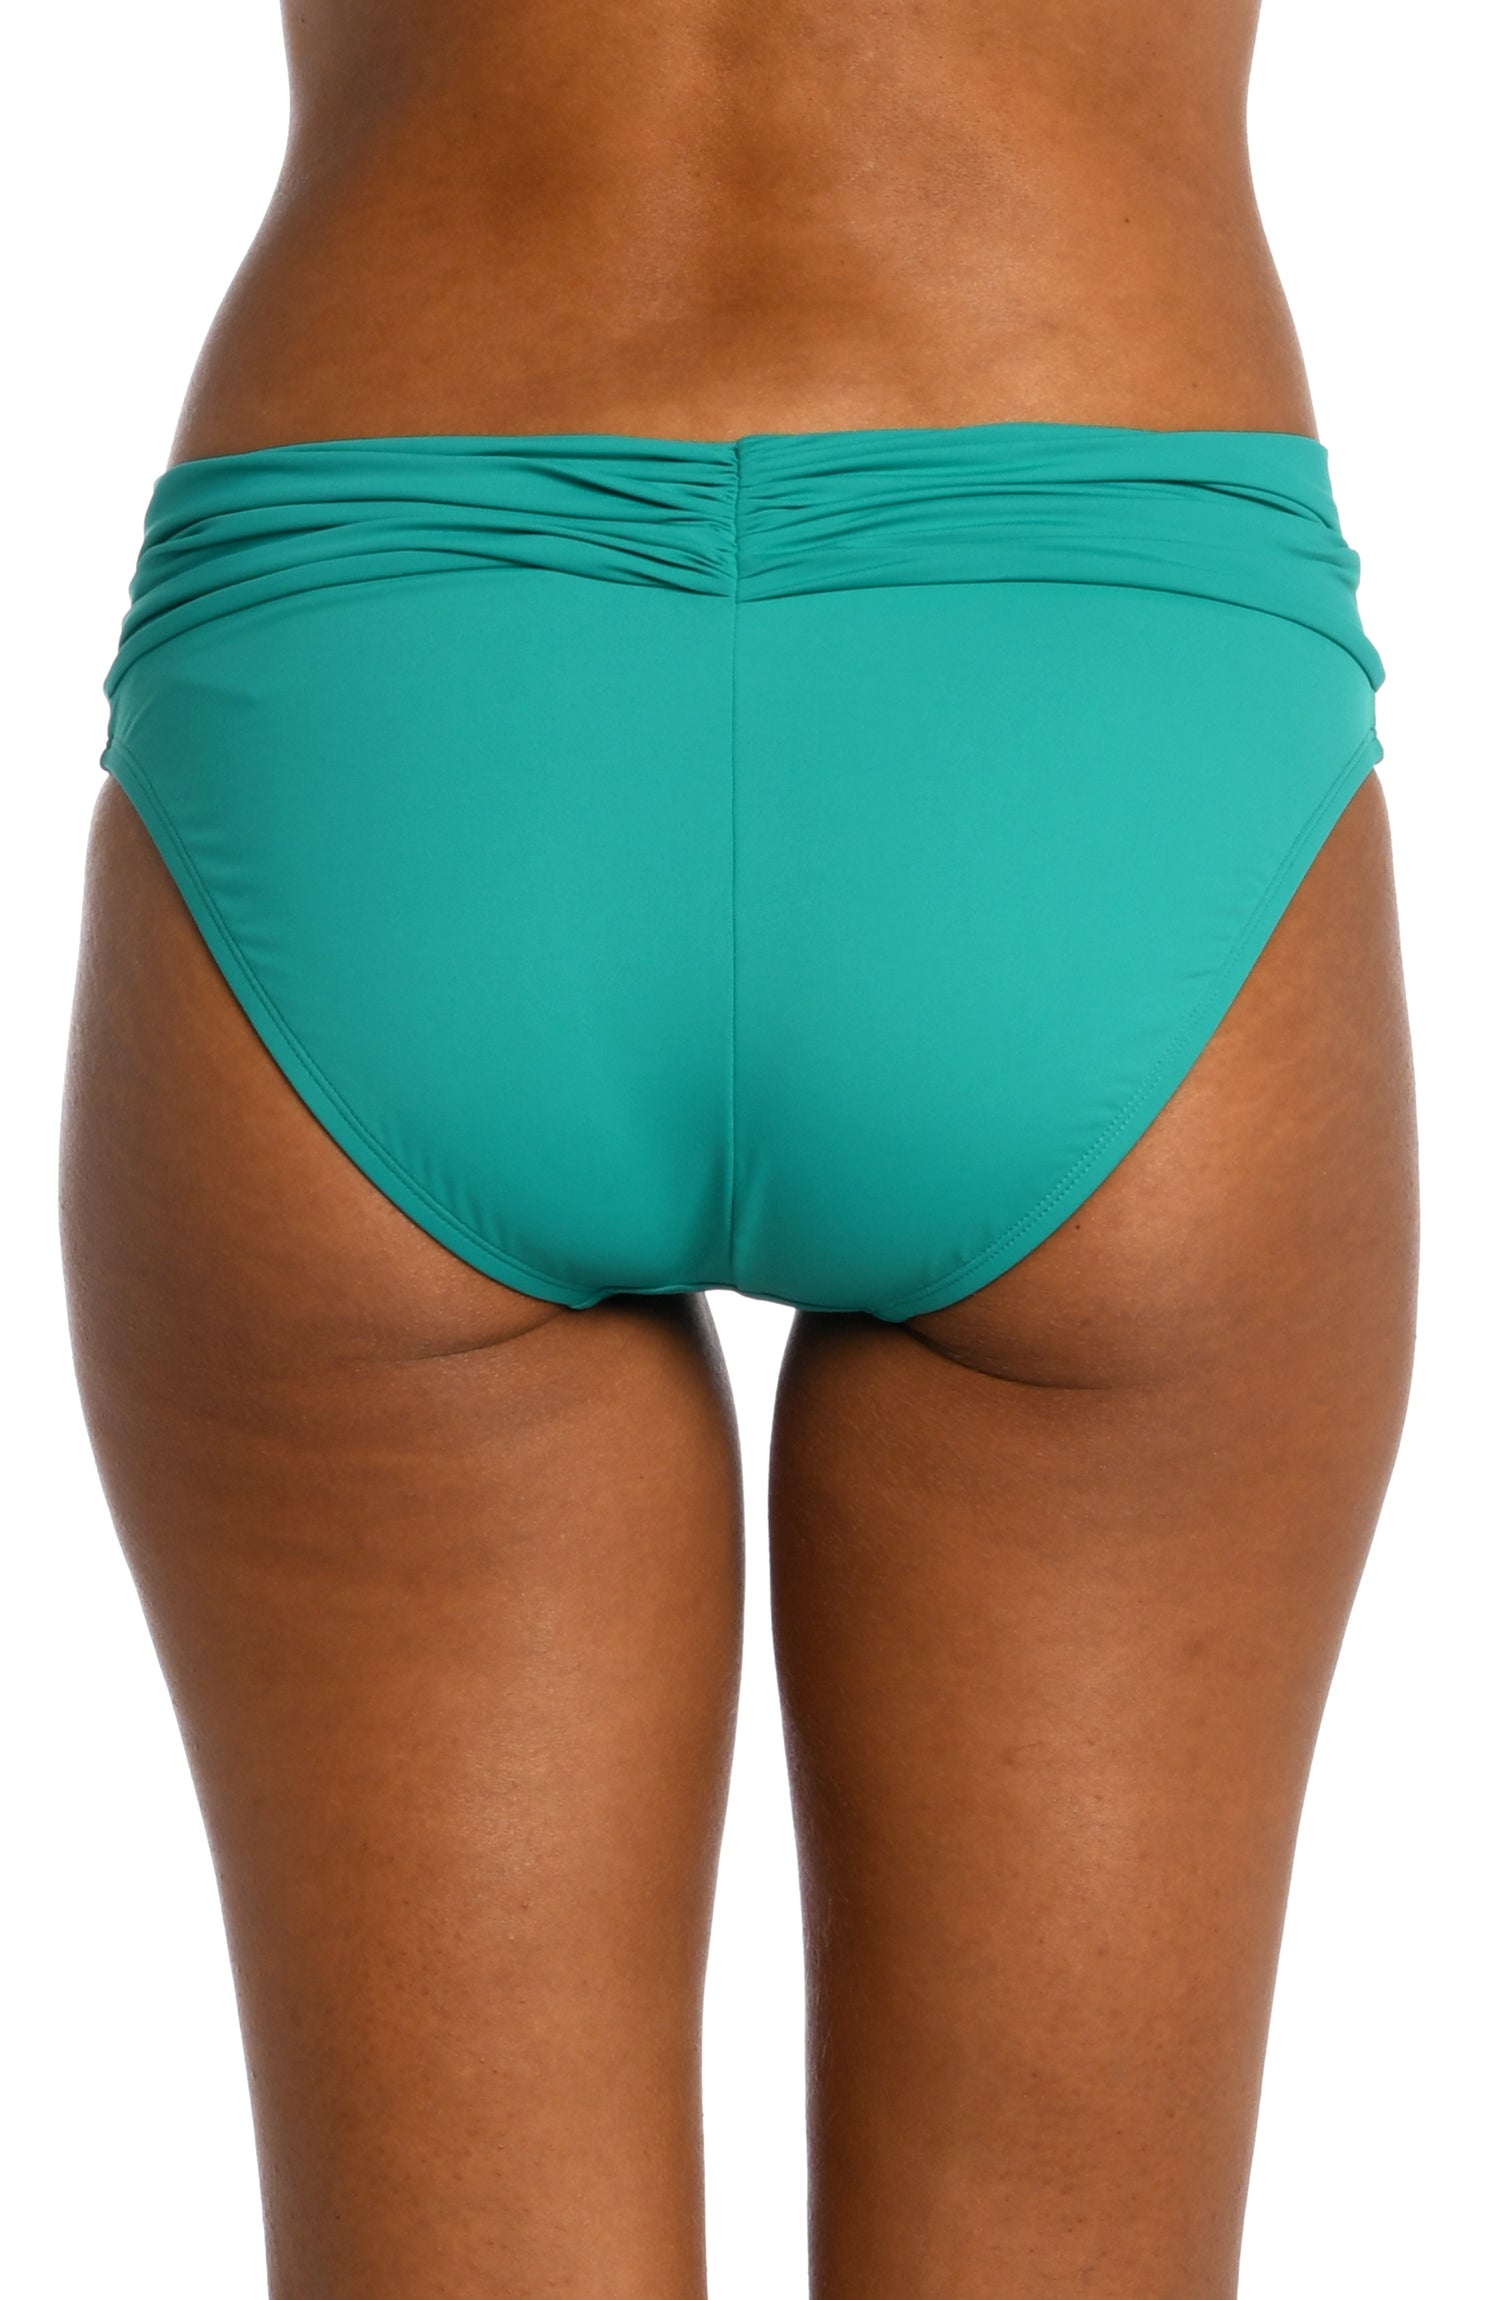 Model is wearing a emerald colored shirred hipster swimsuit bottom from our Best-Selling Island Goddess collection.